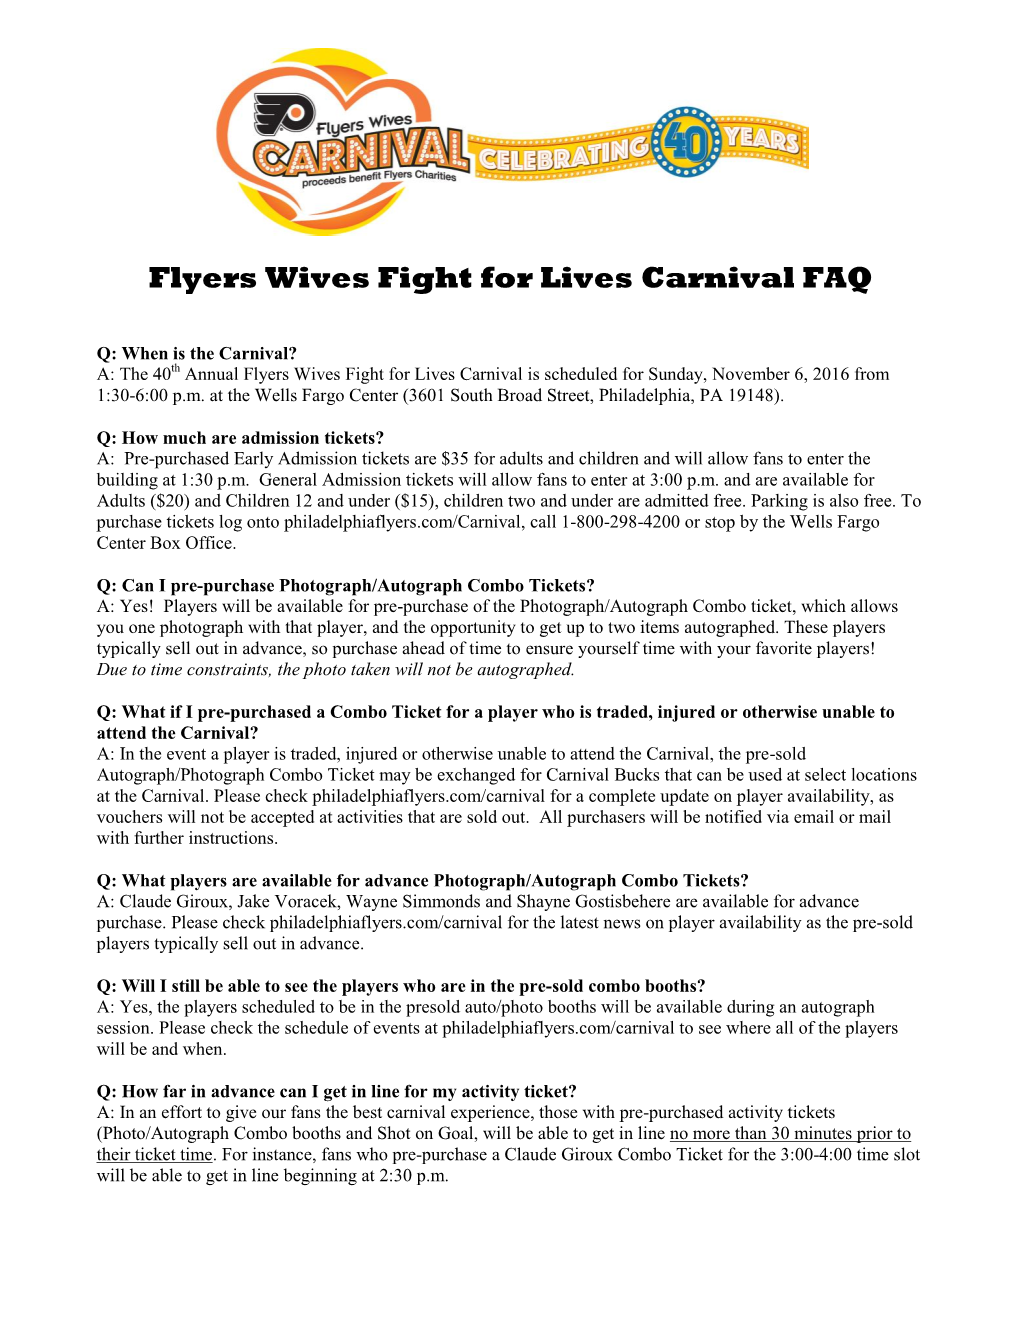 Flyers Wives Fight for Lives: Carnival